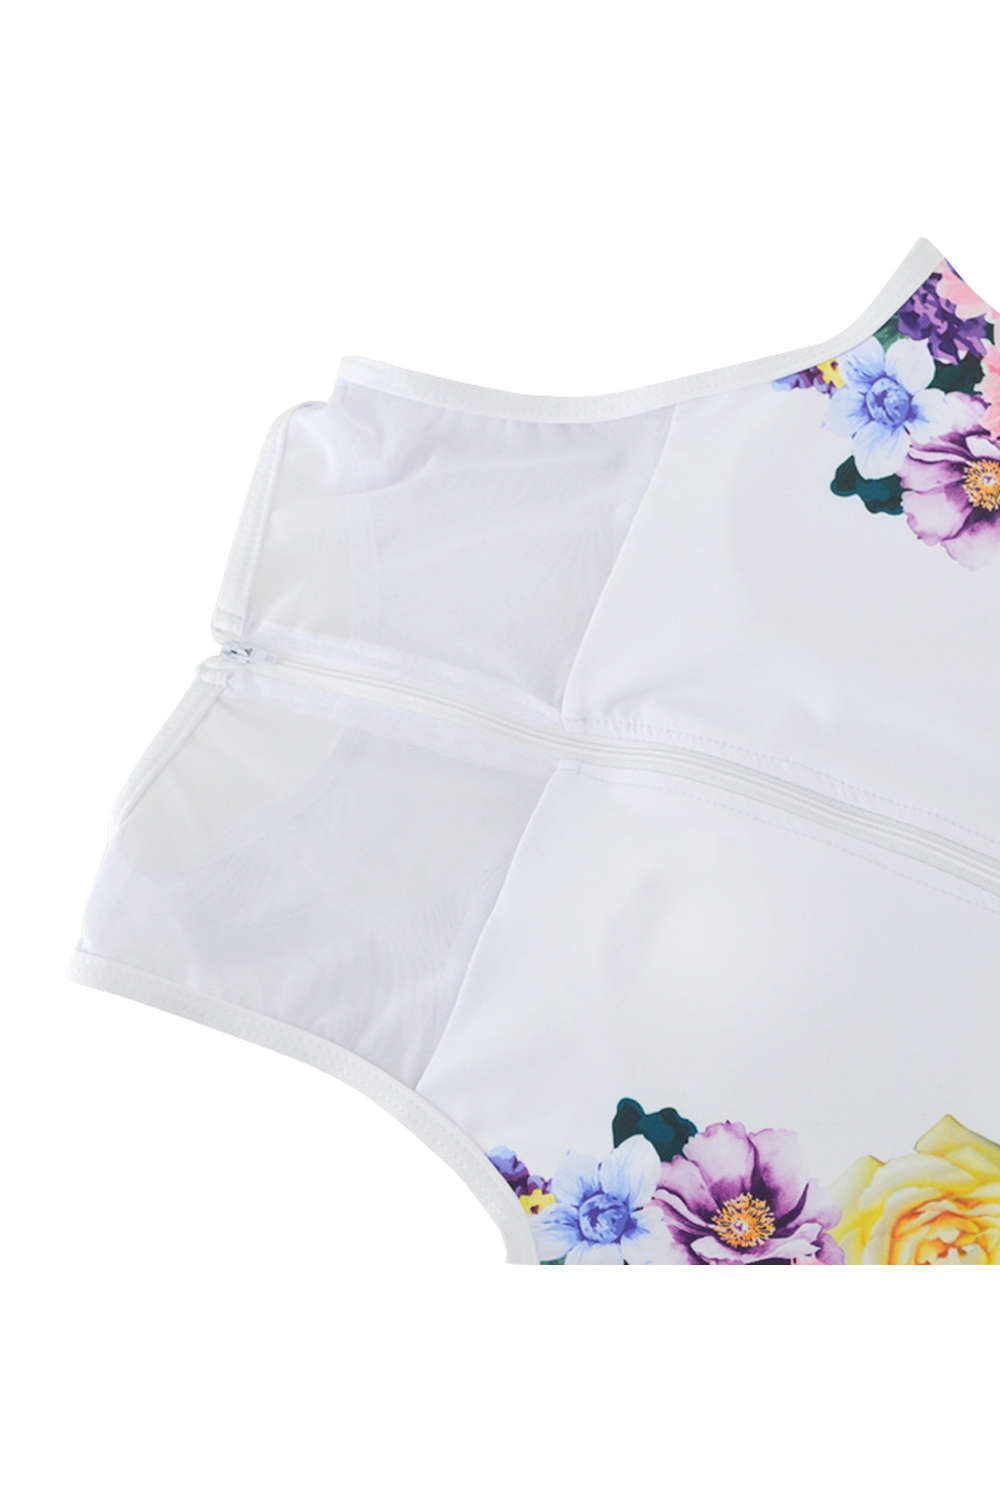 Iyasson White Floral Printing Mesh splicing One-piece Swimsuit